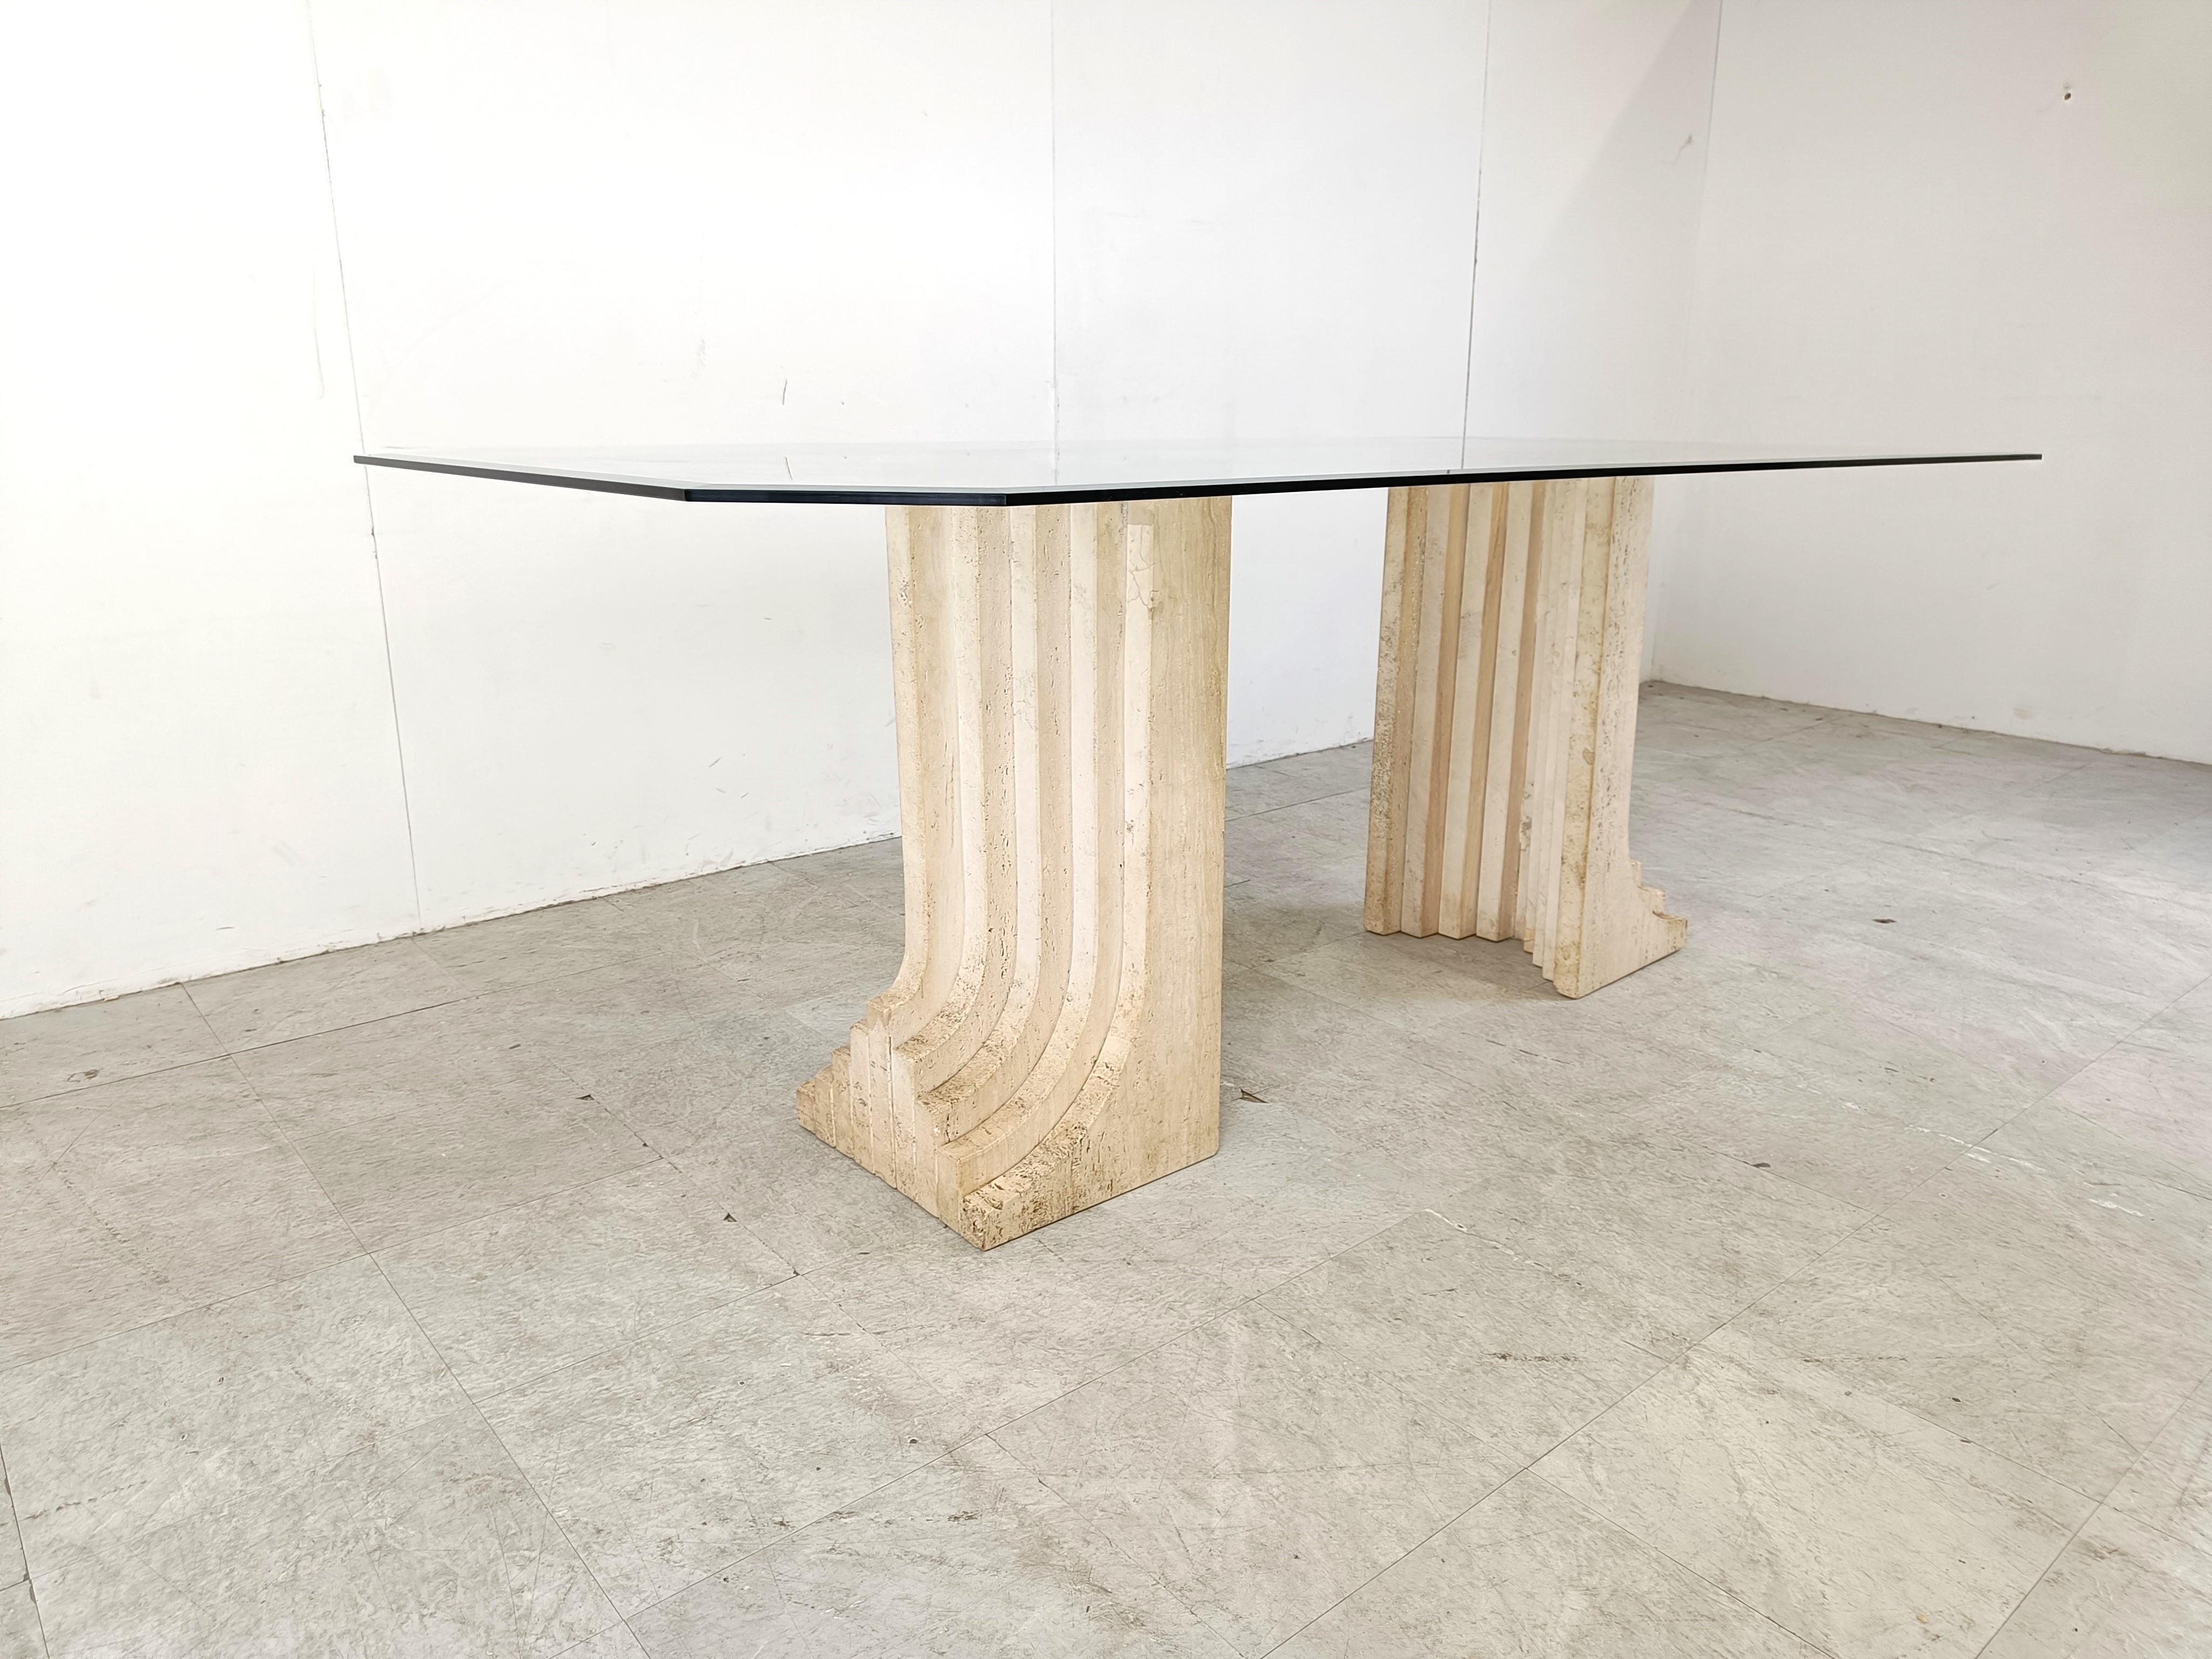 Exquisite travertine dining table in the Style of Carlo Scarpa's Samo dining table.

Beautiful architectural piece made of solid travertine with a thick beveled glass top

Timeless design.

The two travertine bases can easily be put in the center,